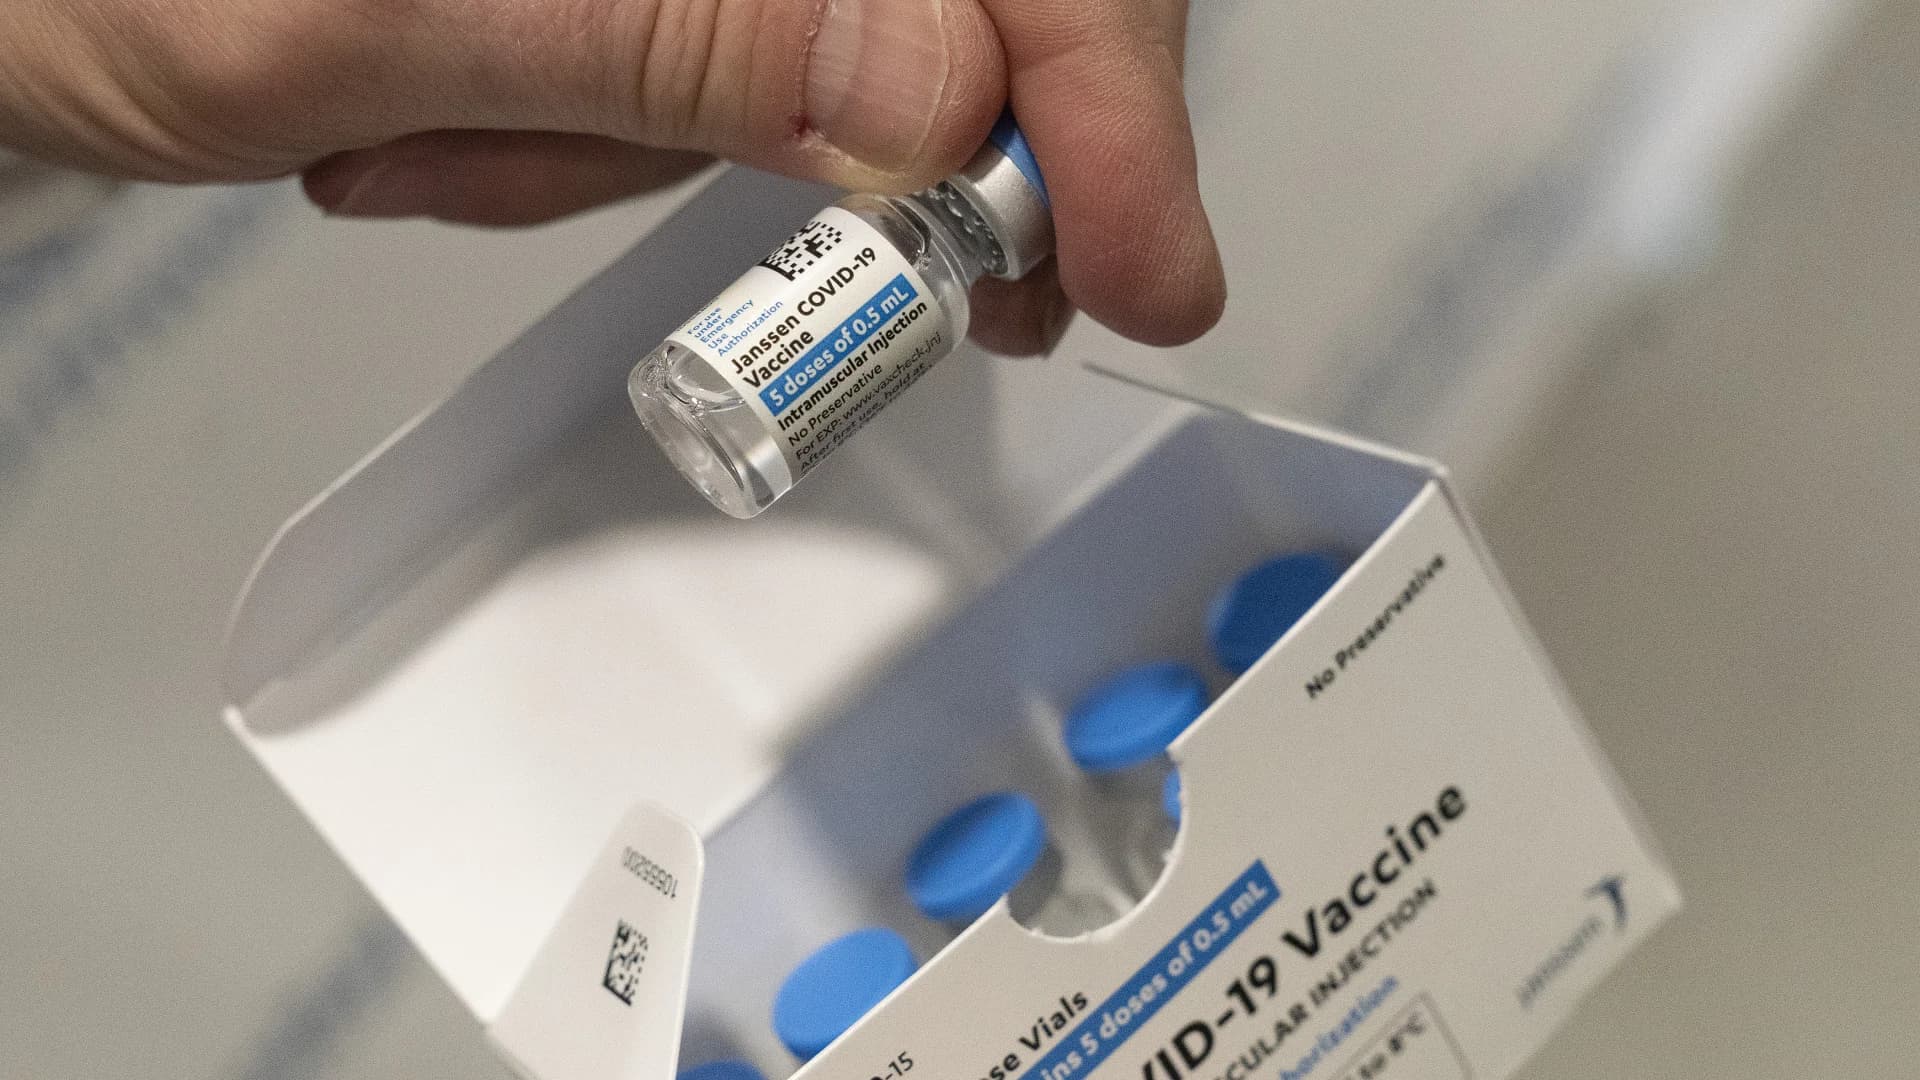 FDA inspection found problems at factory making J&J vaccine